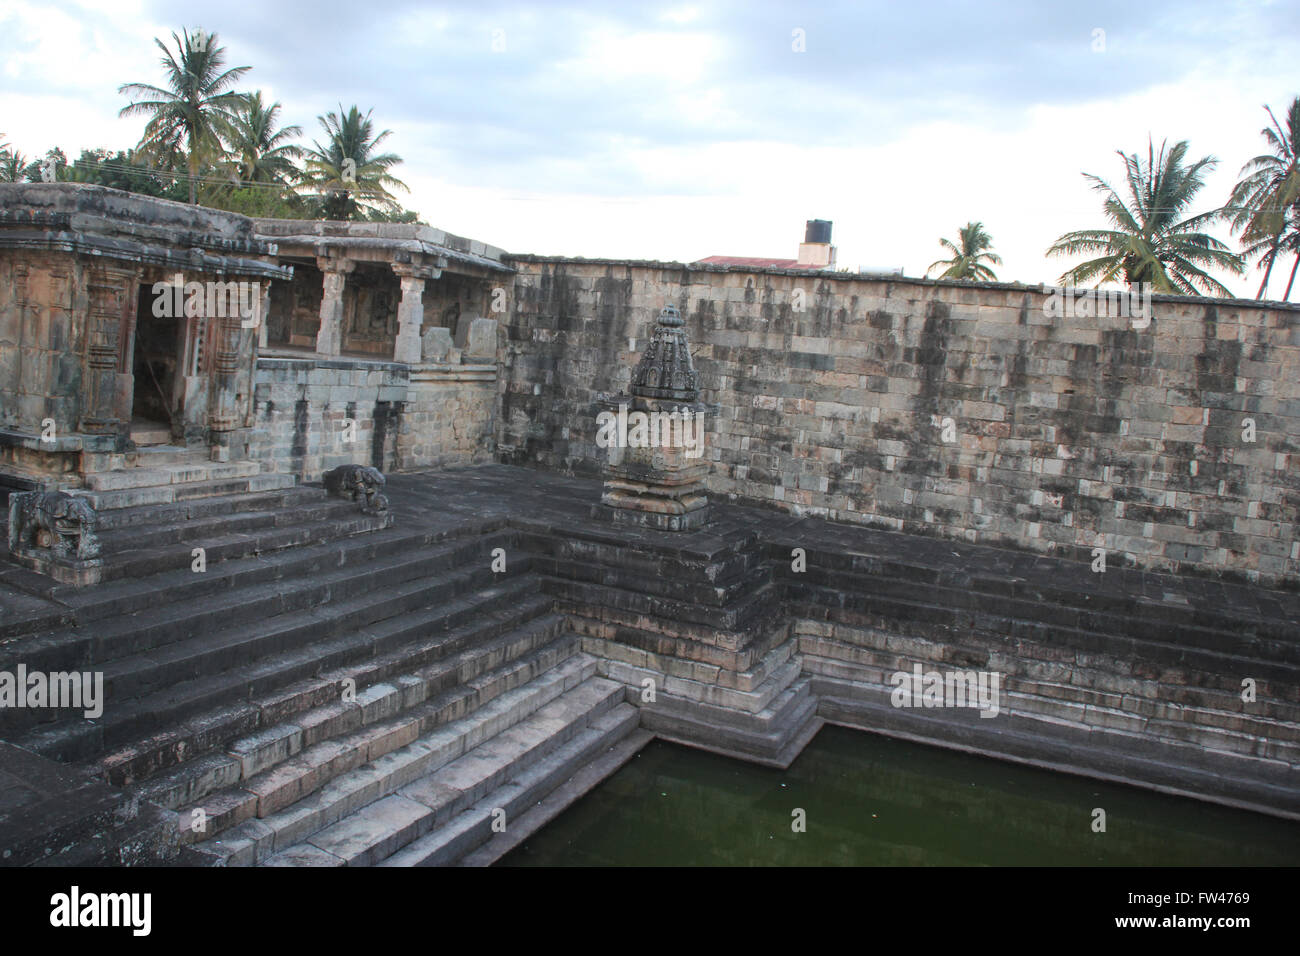 Chennakesava Temple Tank in Belur, Karnataka, locally known as Kalyani or pushkarni, with steps for devotees to fetch water Stock Photo